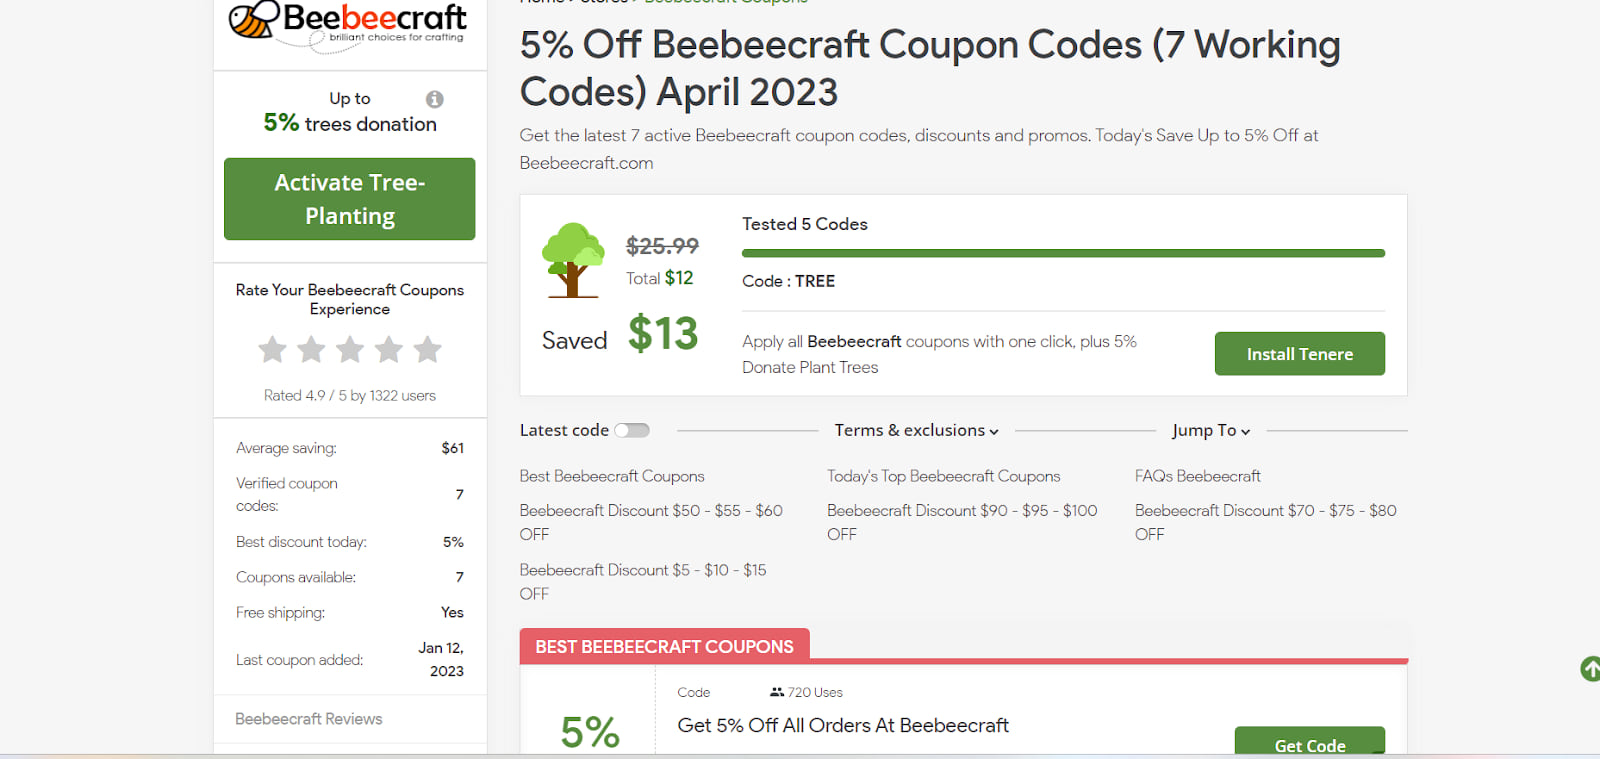 How To Use Beebeecraft coupon code 1